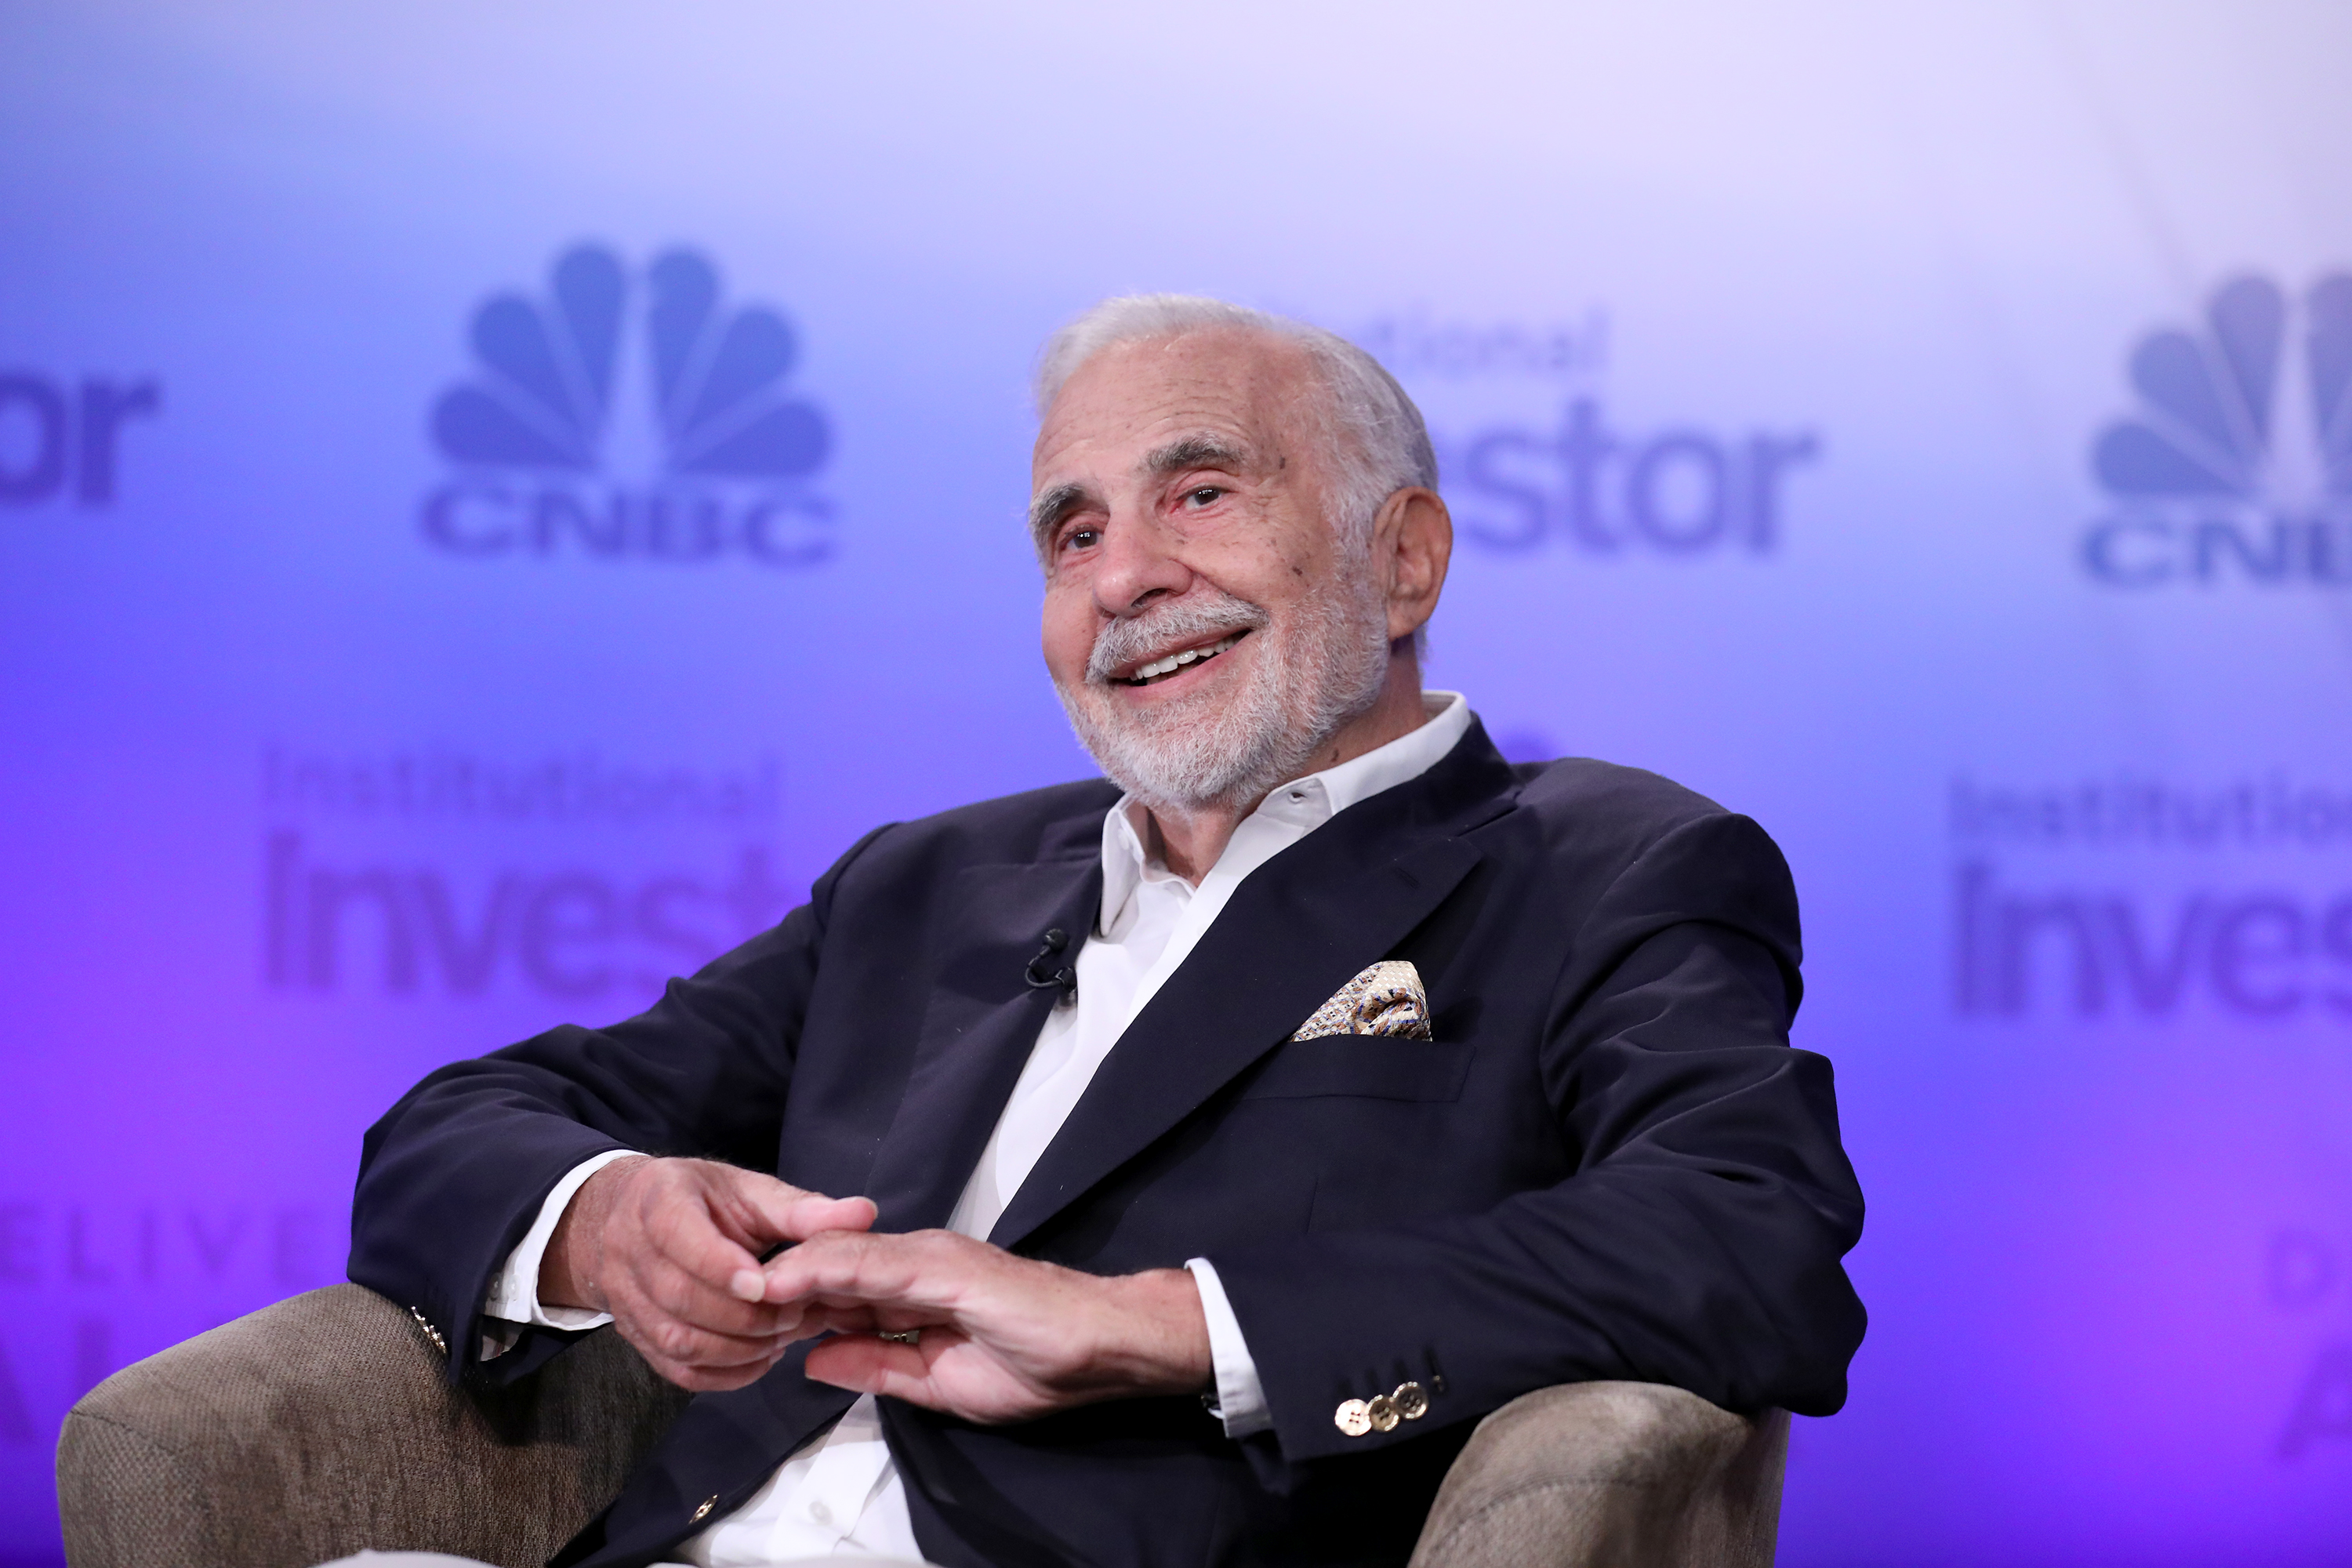 Carl Icahn Says He Bought Stocks During Election Night Dip